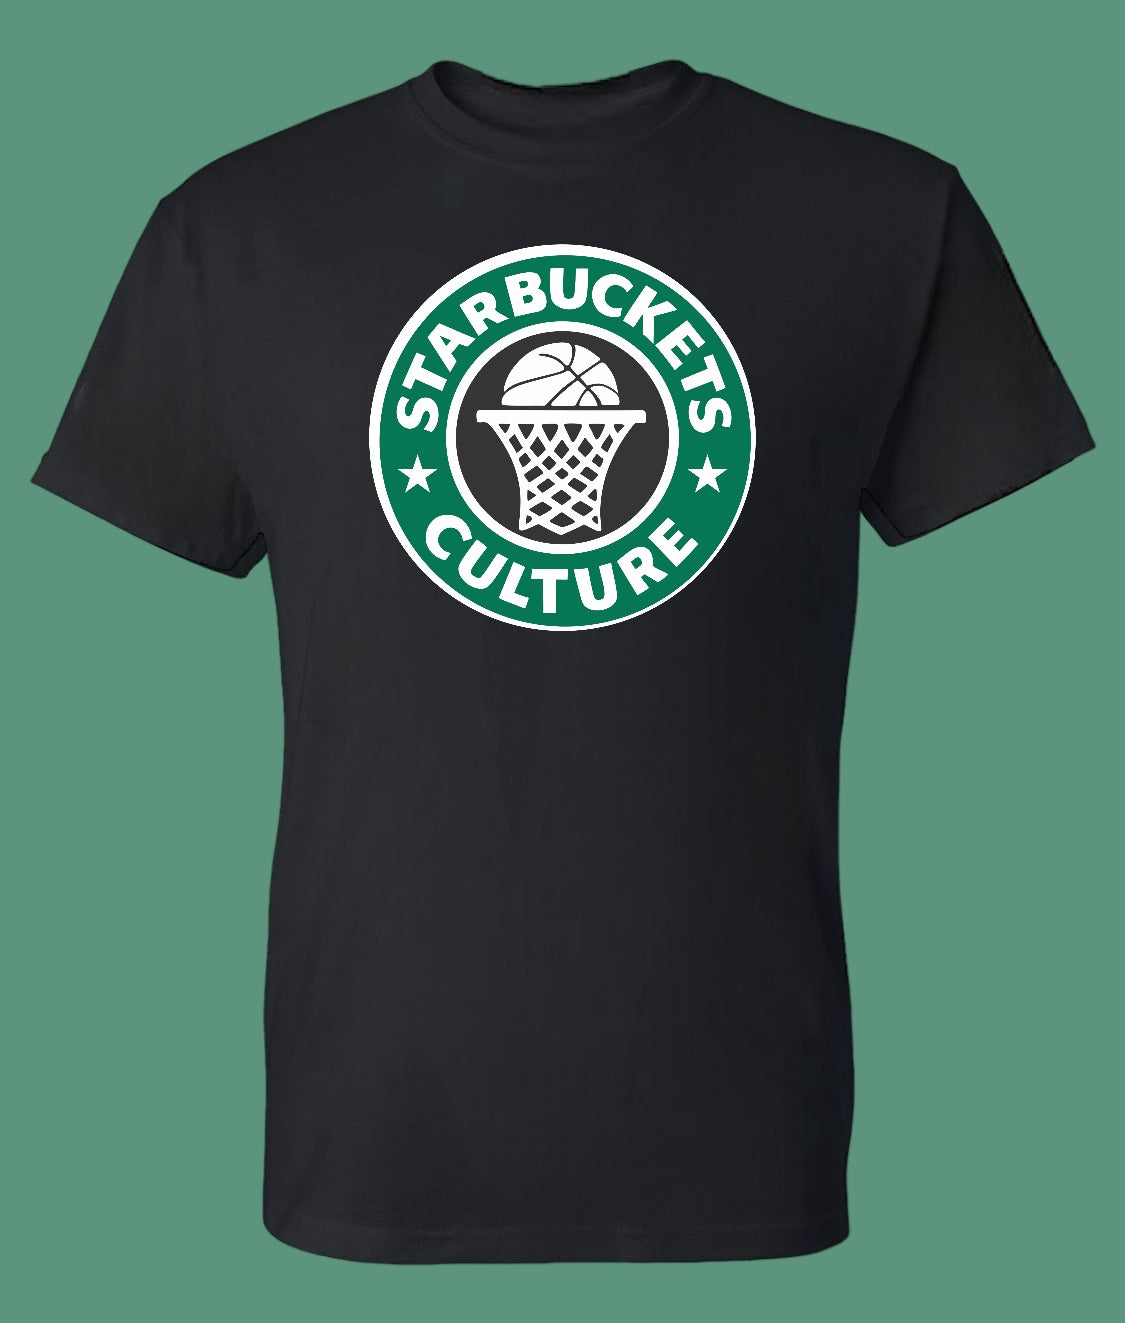 HOOPS MERCH - YOUTH & ADULT SIZE SHORT SLEEVE TEE'S-TAX INCLUDED IN PRICING